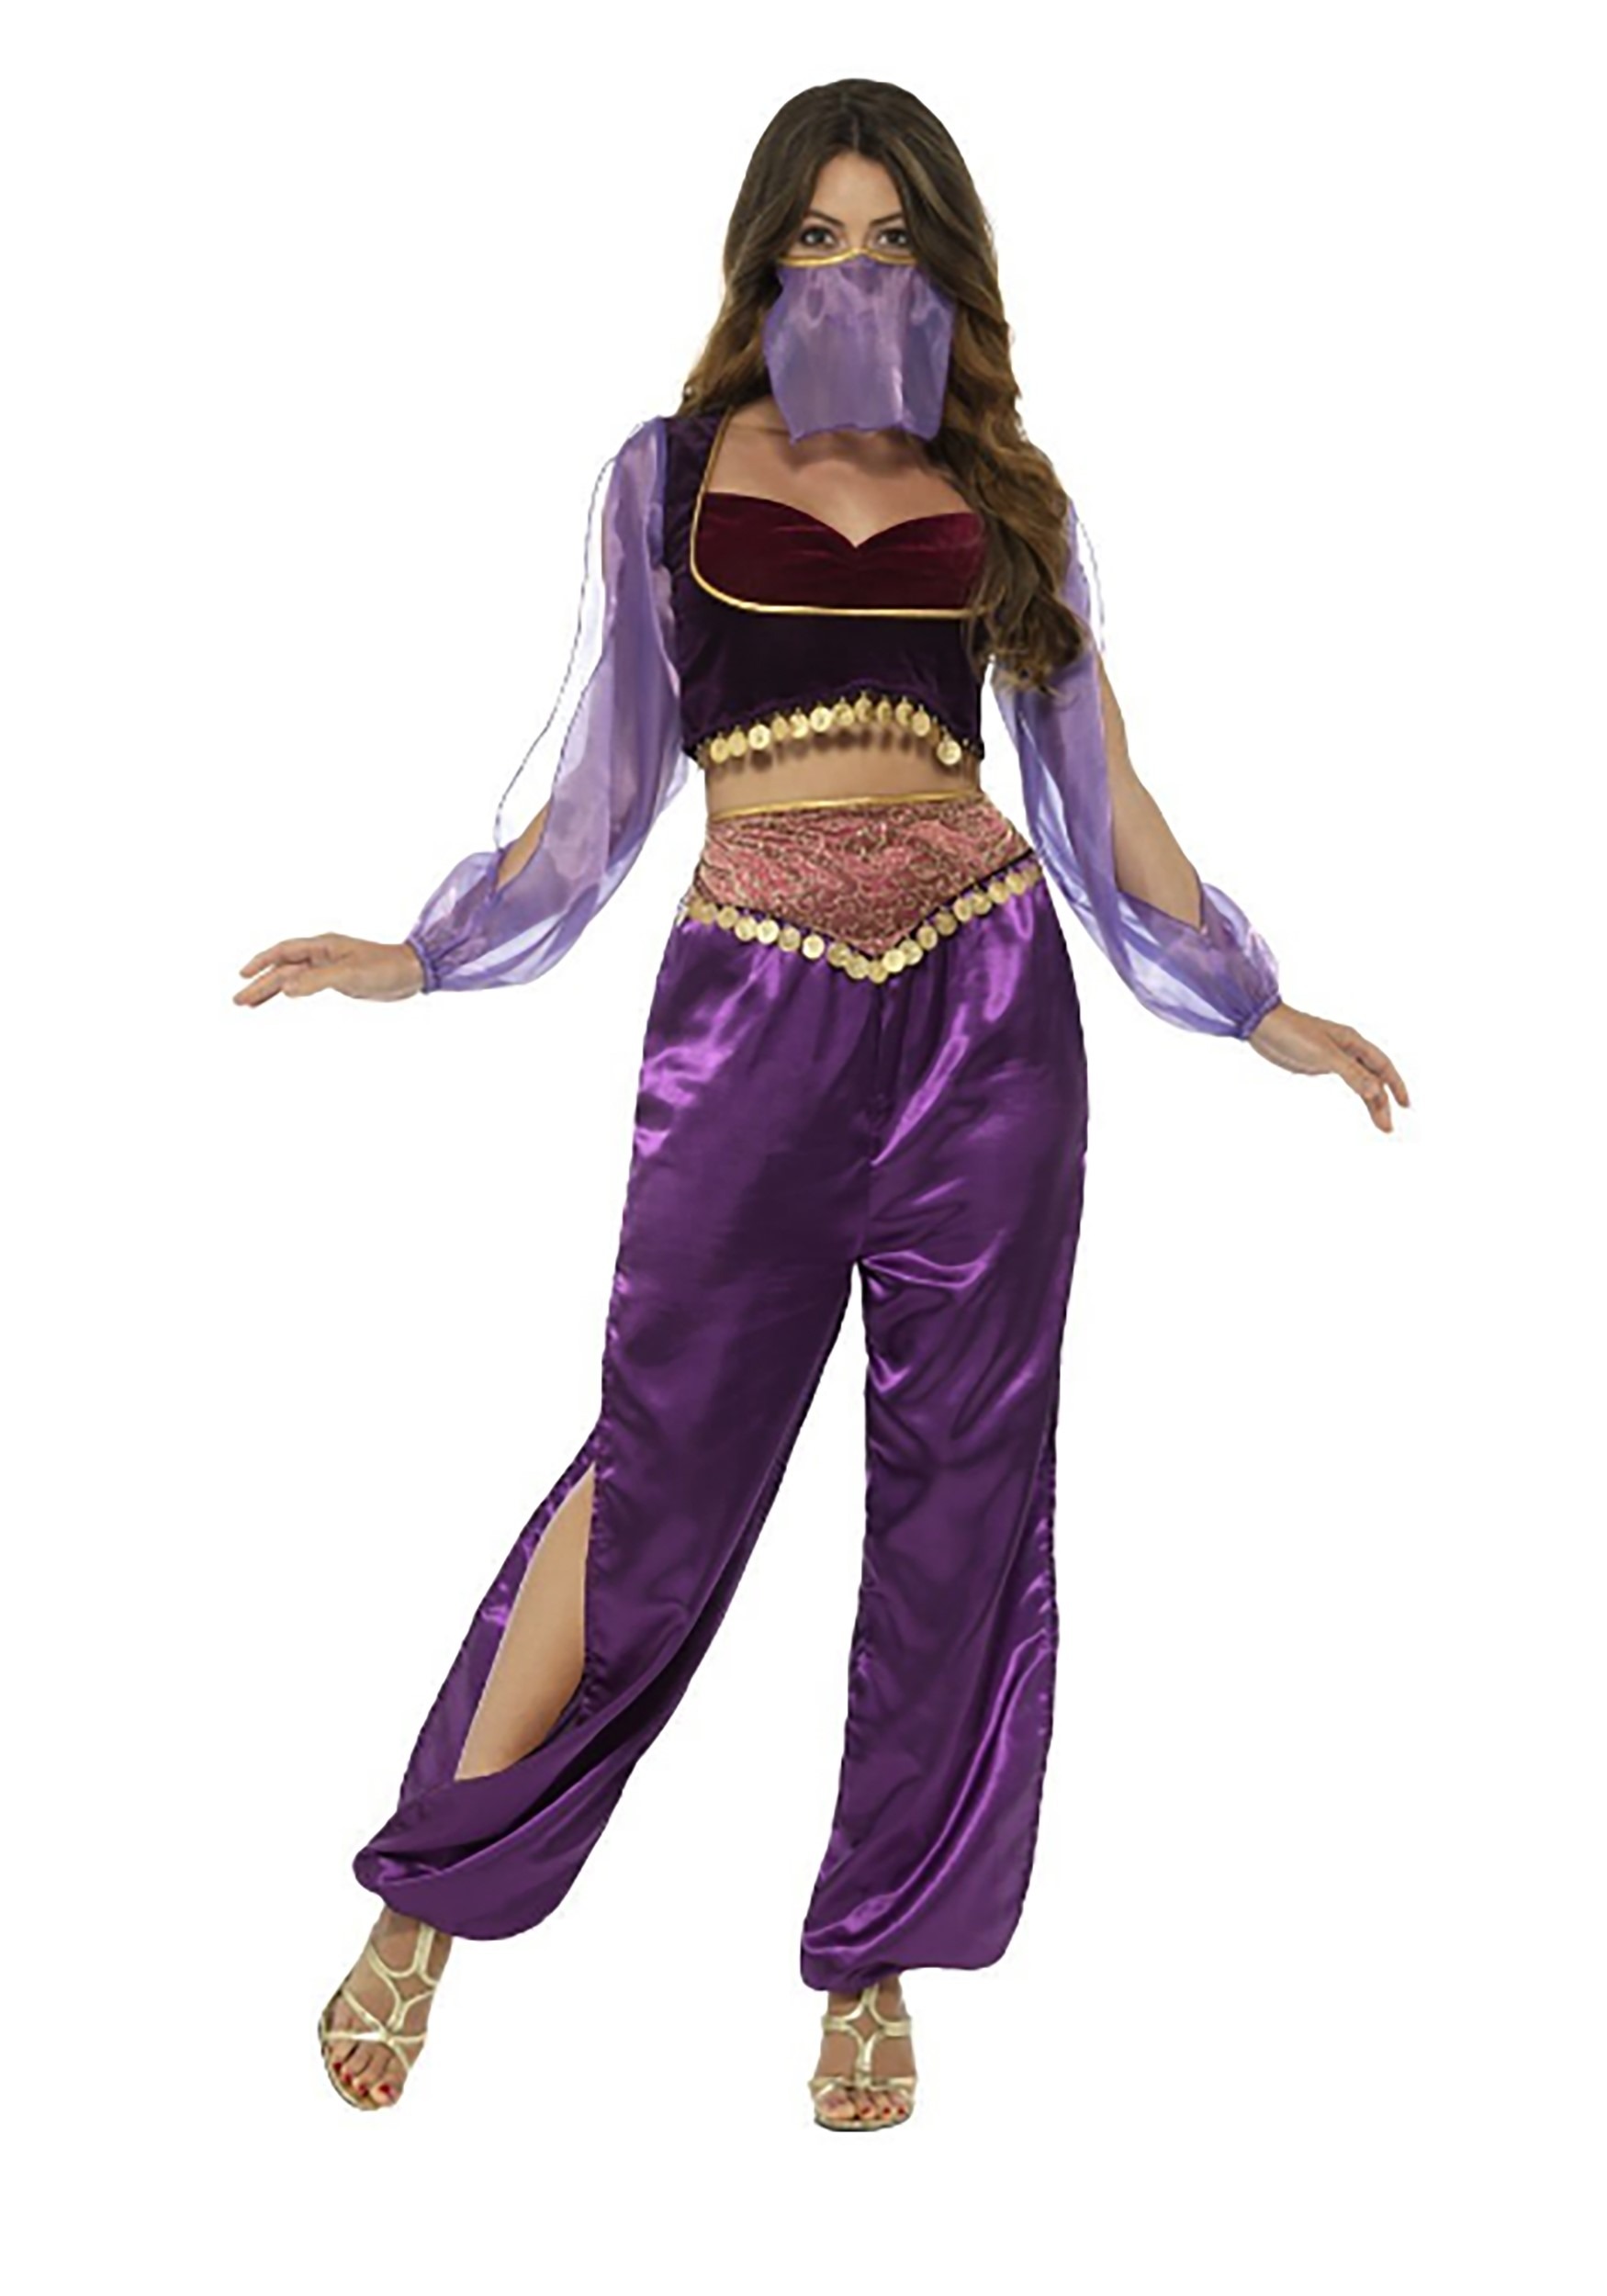 https://images.halloweencostumes.eu/products/58259/1-1/womens-purple-belly-dancer-costume.jpg